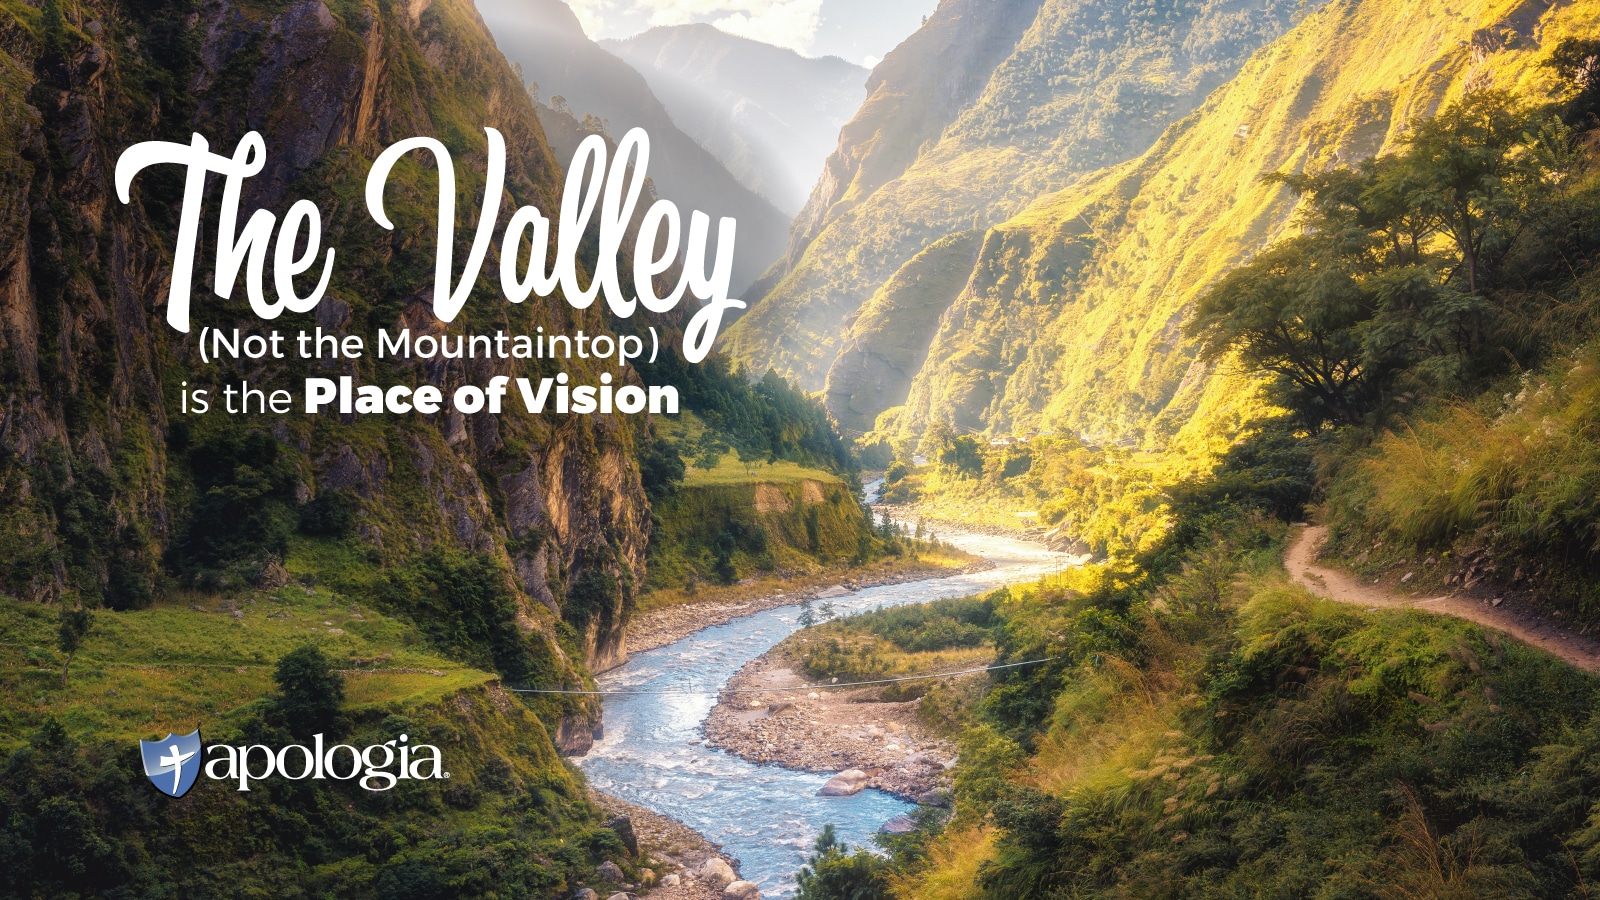 The Valley (Not the Mountaintop) is the Place of Vision